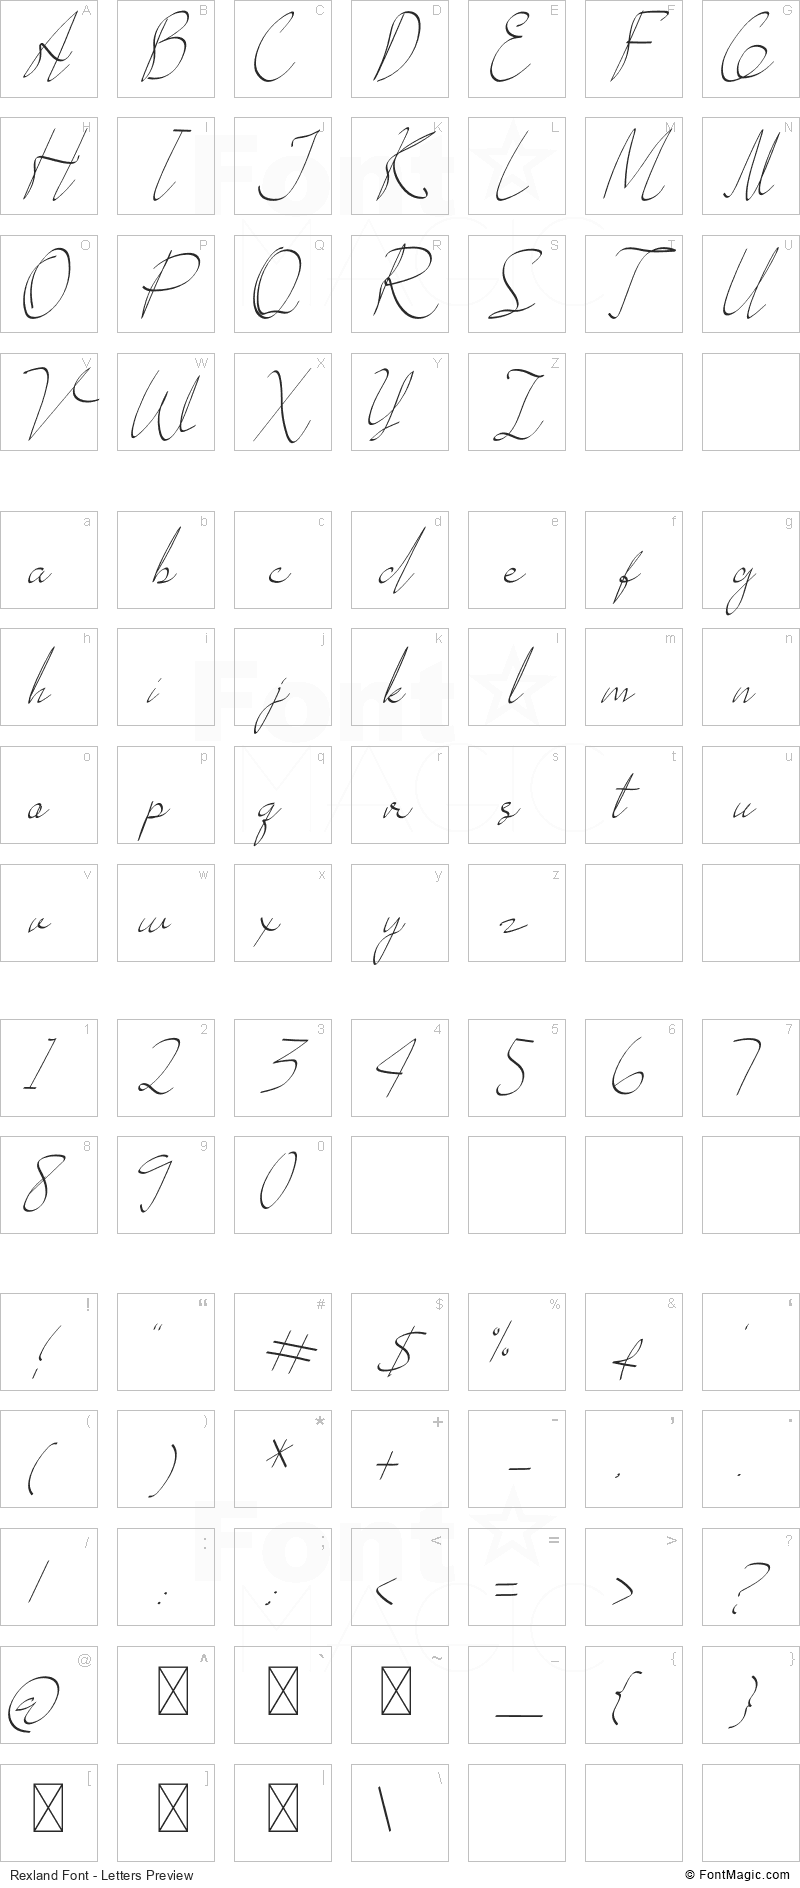 Rexland Font - All Latters Preview Chart